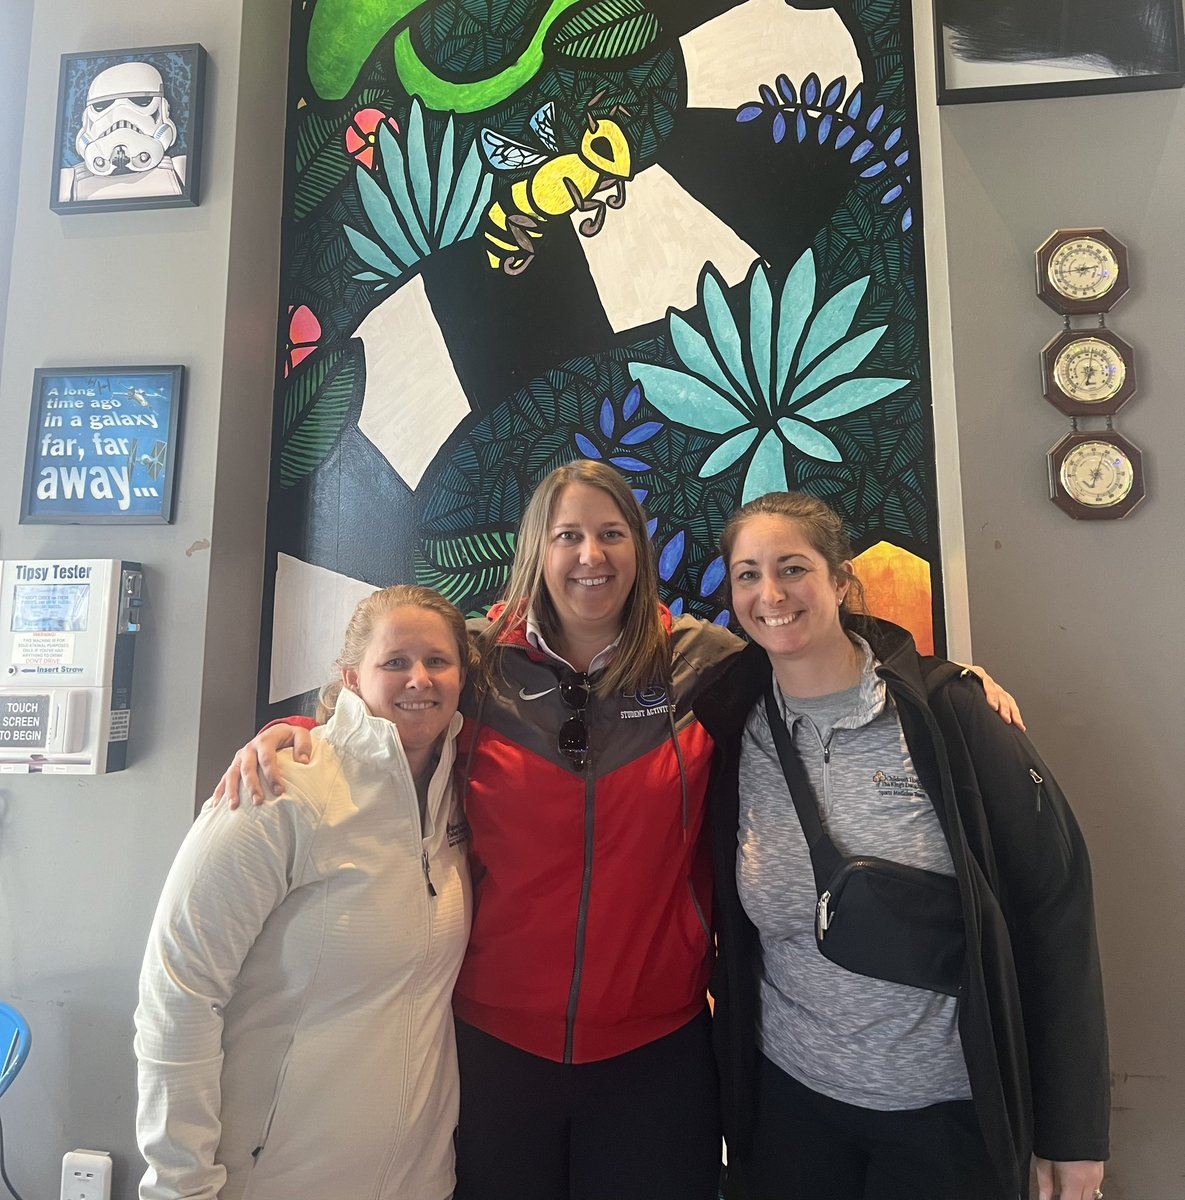 Happy National Athletic Training Month to our favorite @_CHKD athletic trainers, Mrs. Fencil and Mrs. Minor! We appreciate all you do for our athletes. #chiefKHSpride